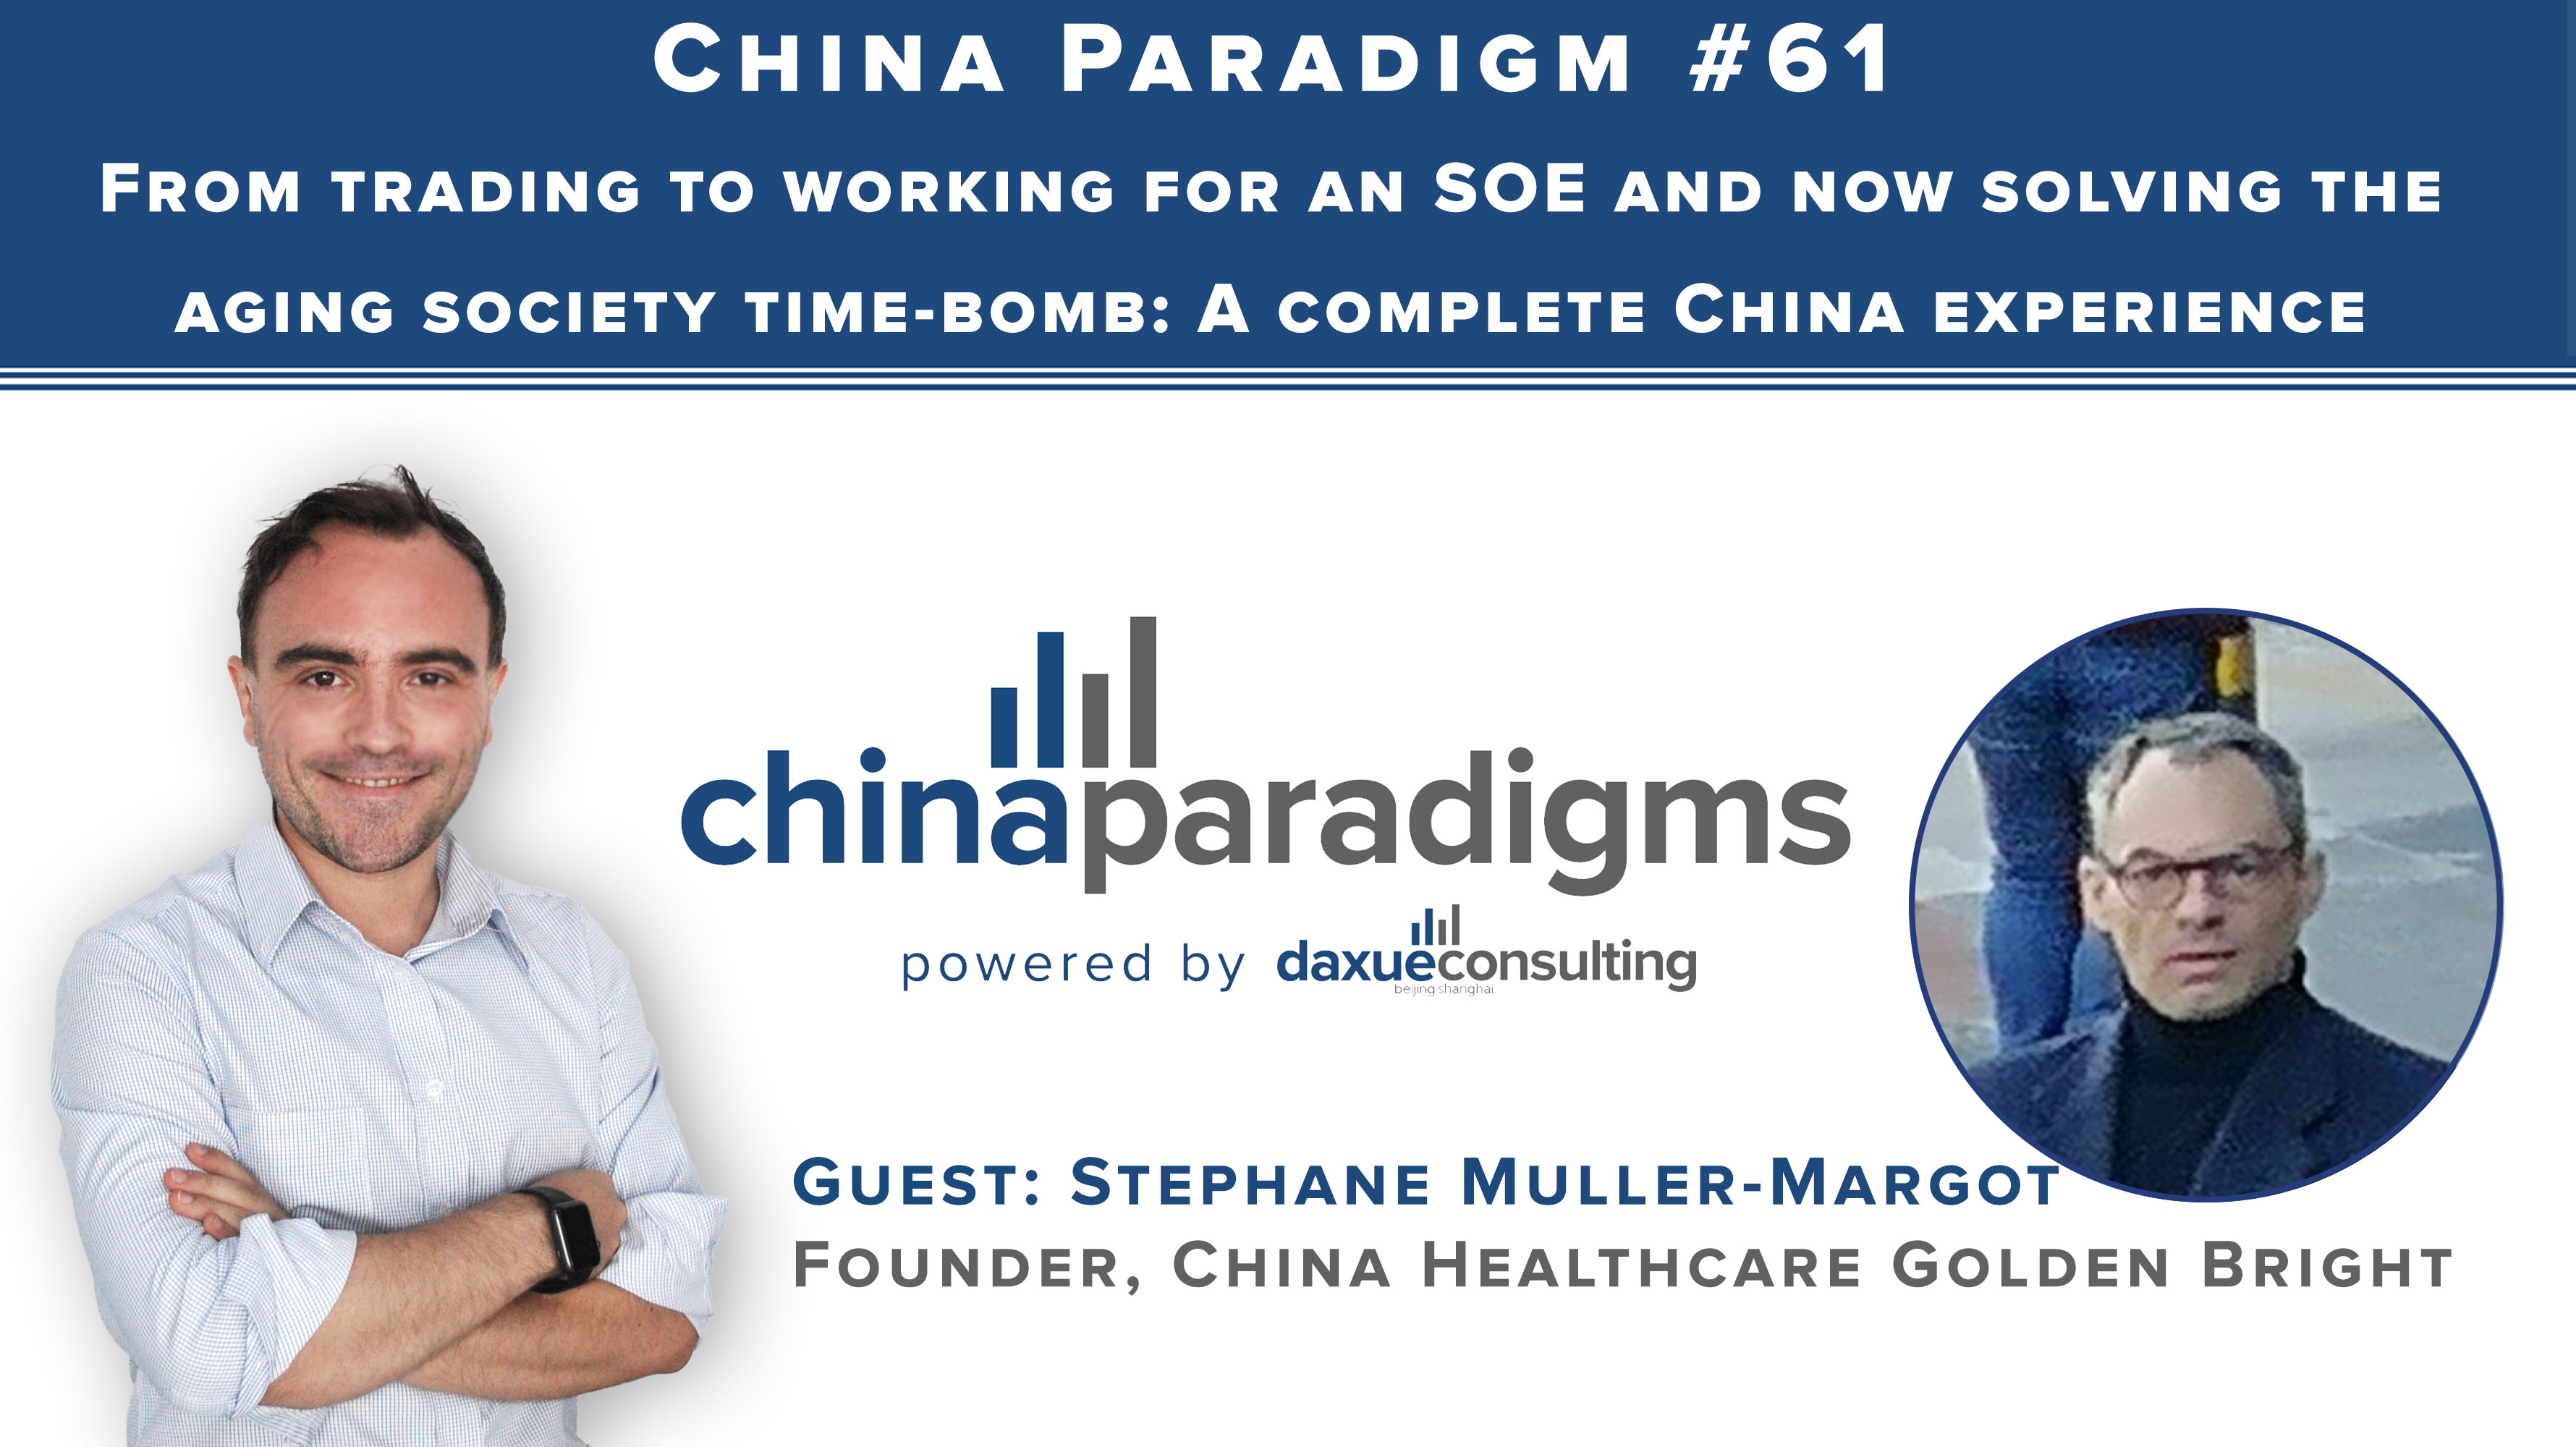 China Paradigm 61: From trading to solving the aging society time-bomb: A complete China experience